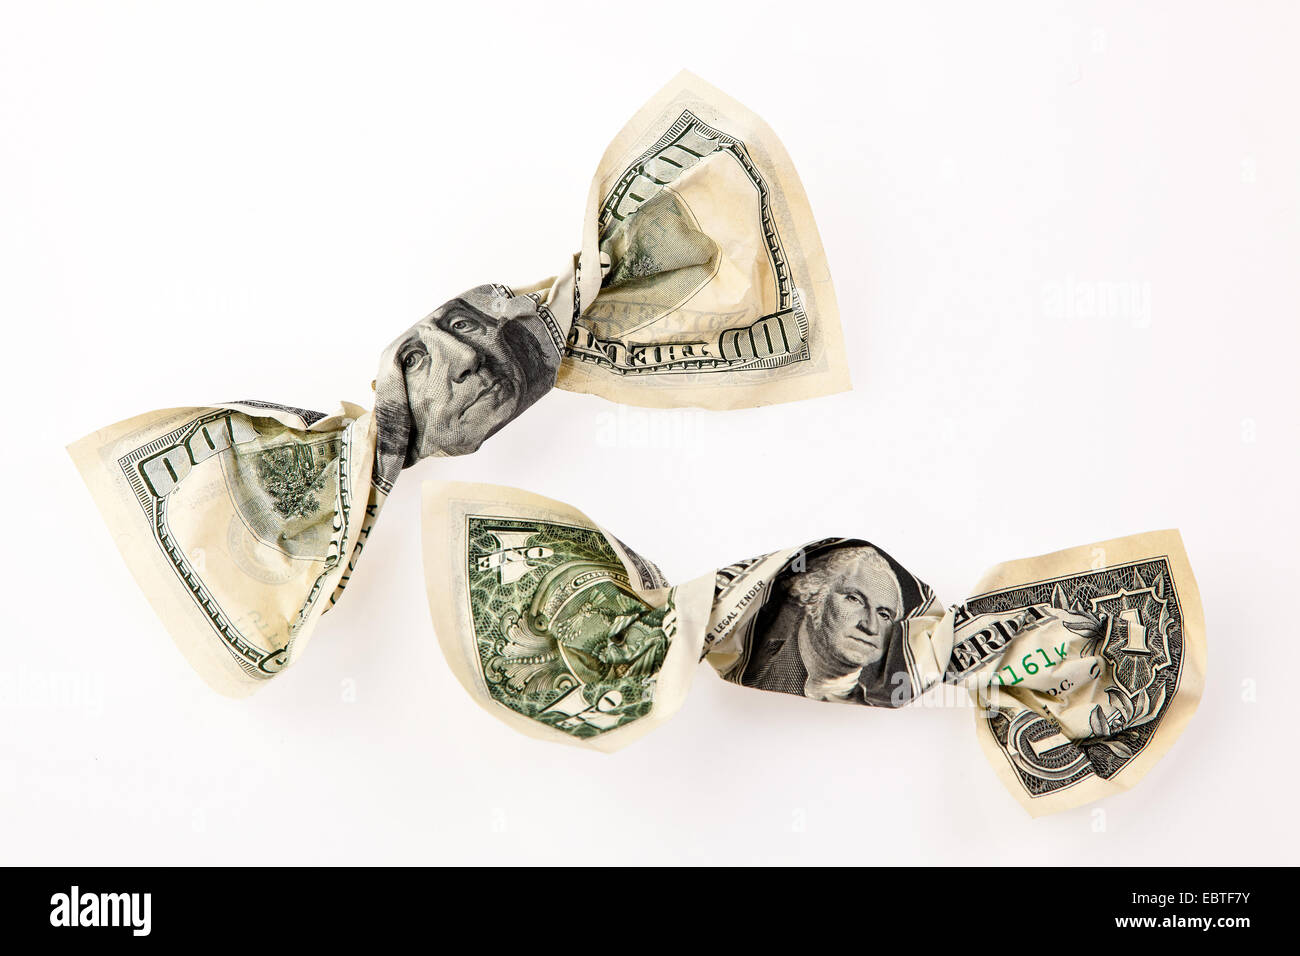 bonbons wrapped into Dollar bills symbolising the reduction of taxes as a promise during the election campaign, USA Stock Photo